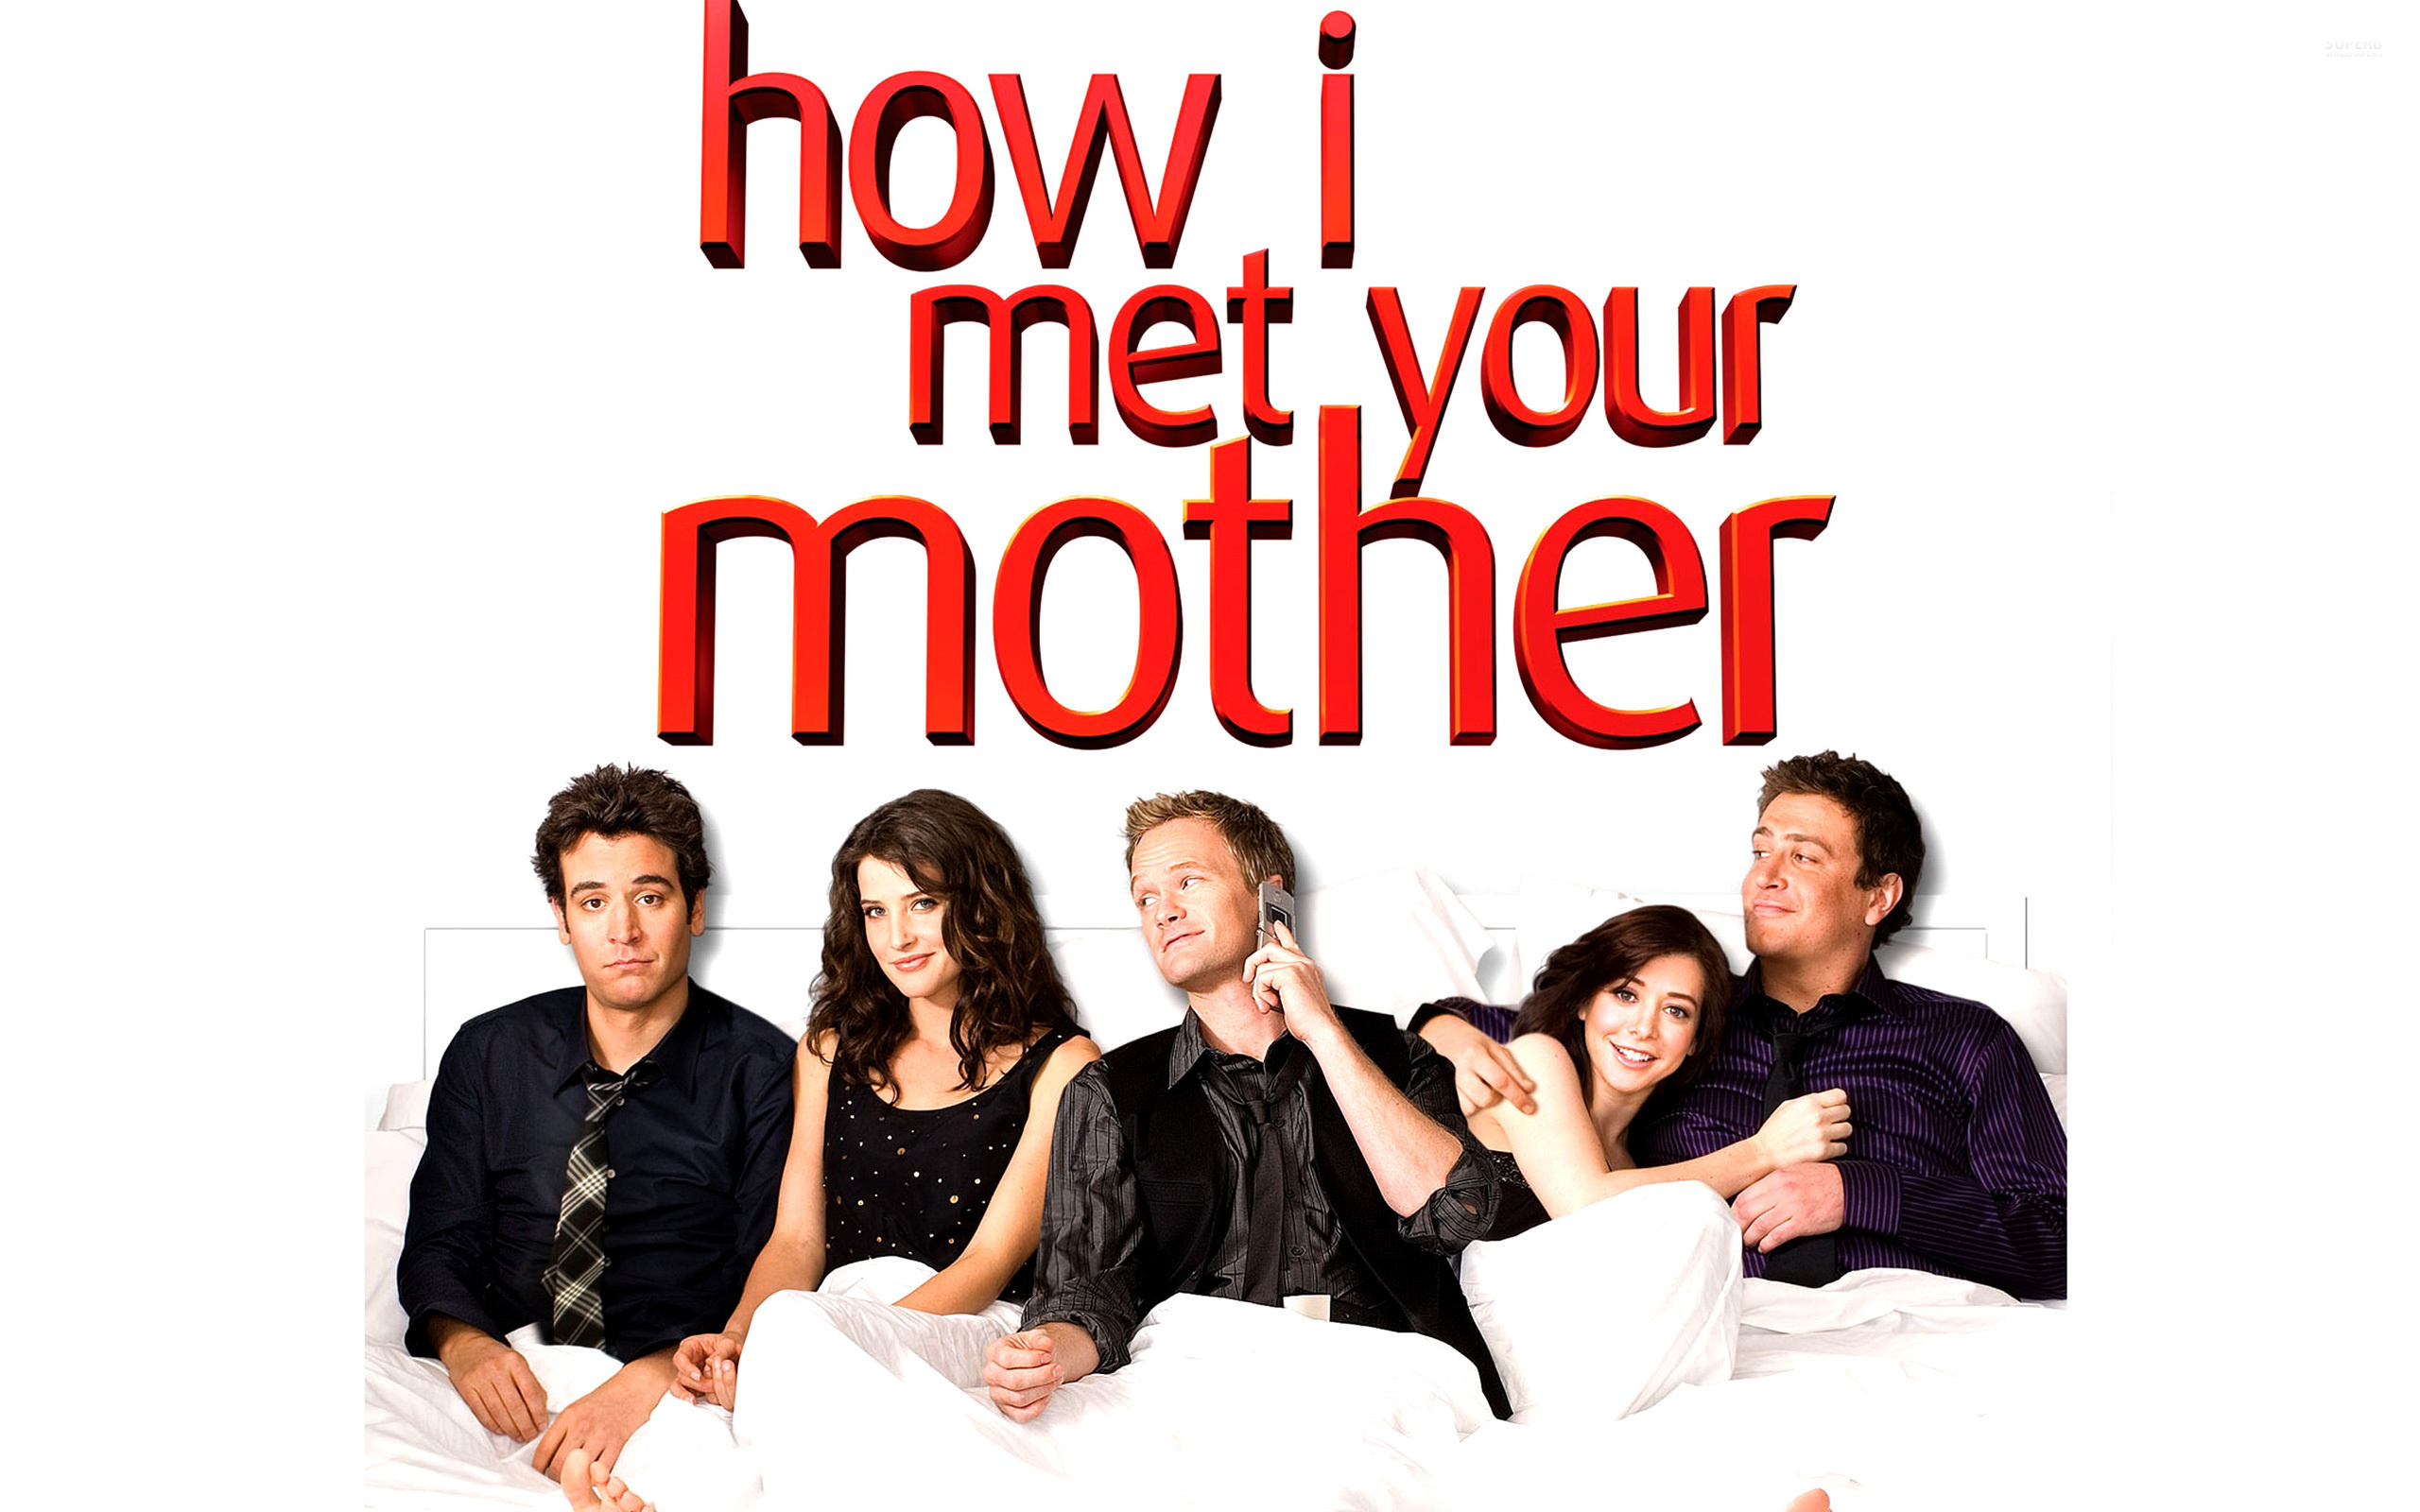 HIMYM TV series, Quirky humor, Heartwarming stories, Endearing characters, 2560x1600 HD Desktop